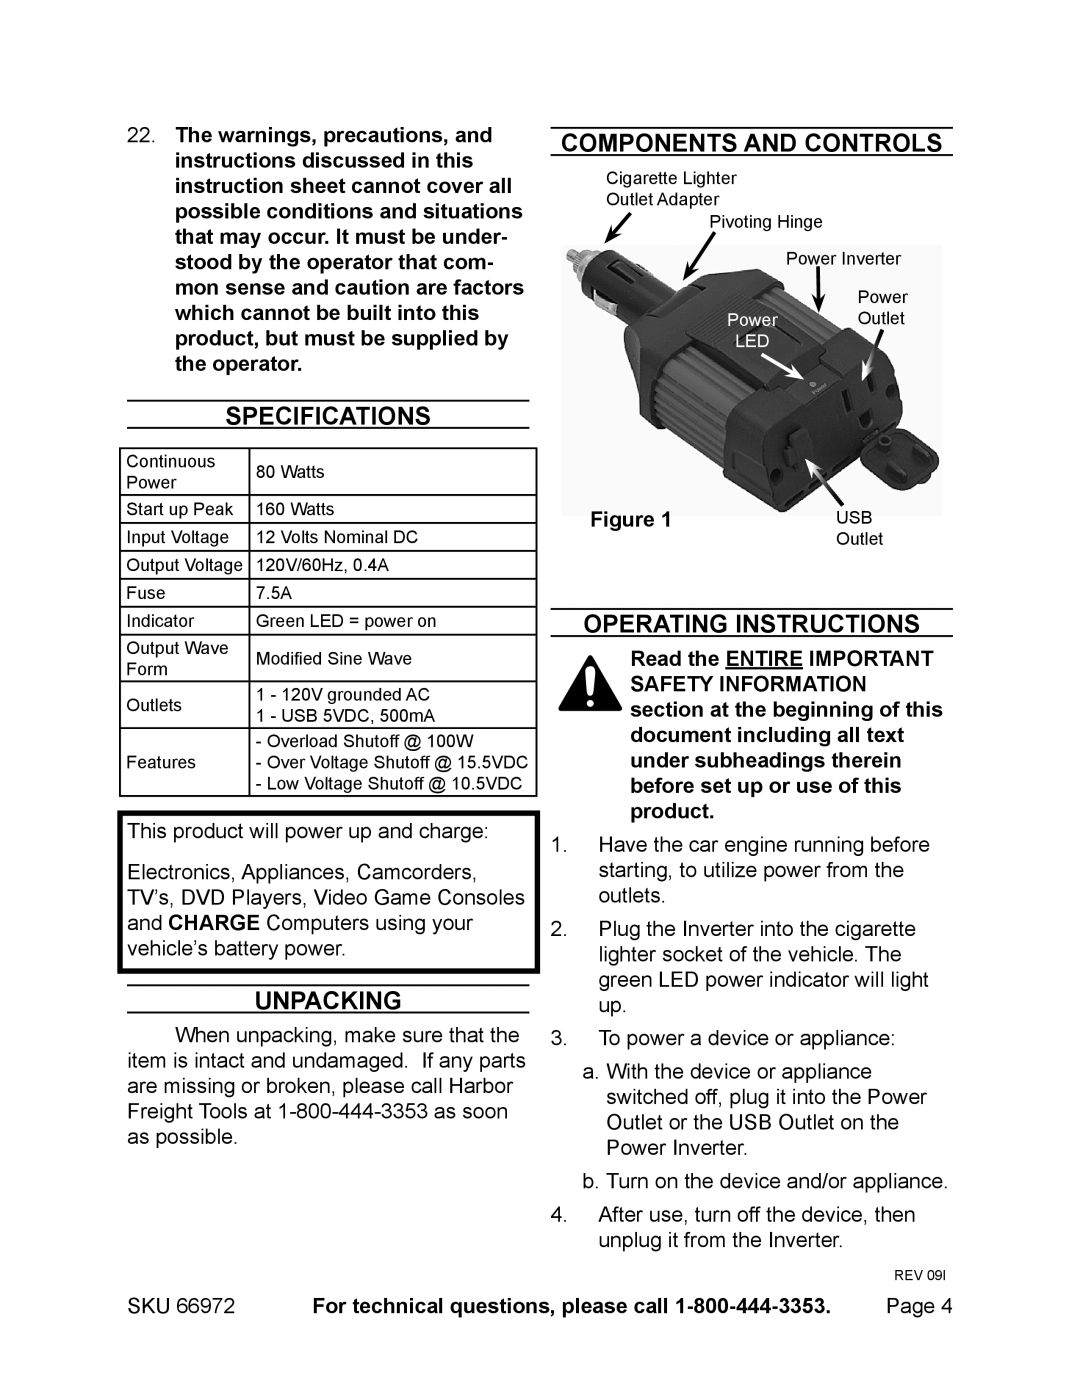 Chicago Electric 66972 operating instructions Components and Controls, Specifications, Unpacking, OPERATING Instructions 